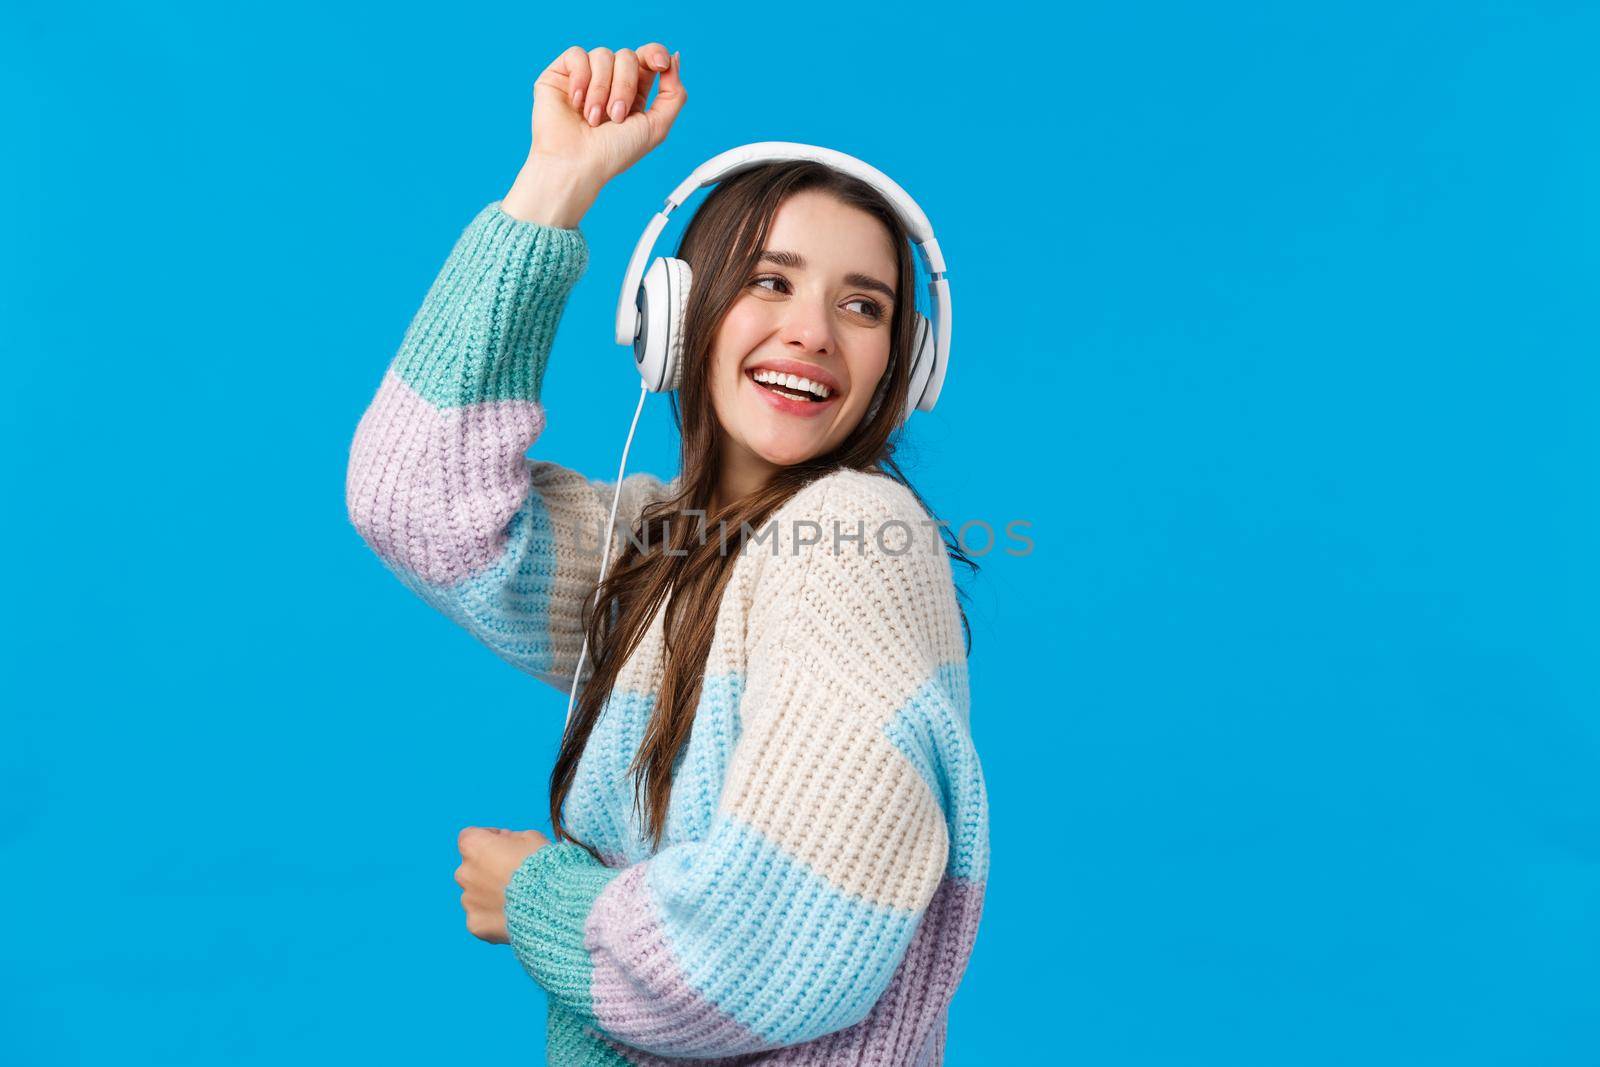 Waist-up portrait carefree, happy dancing woman in headphones, smiling raising hands up free and upbeat, enjoying favorite songs, special winter holidays playlisty, laughing joyfully, blue background.